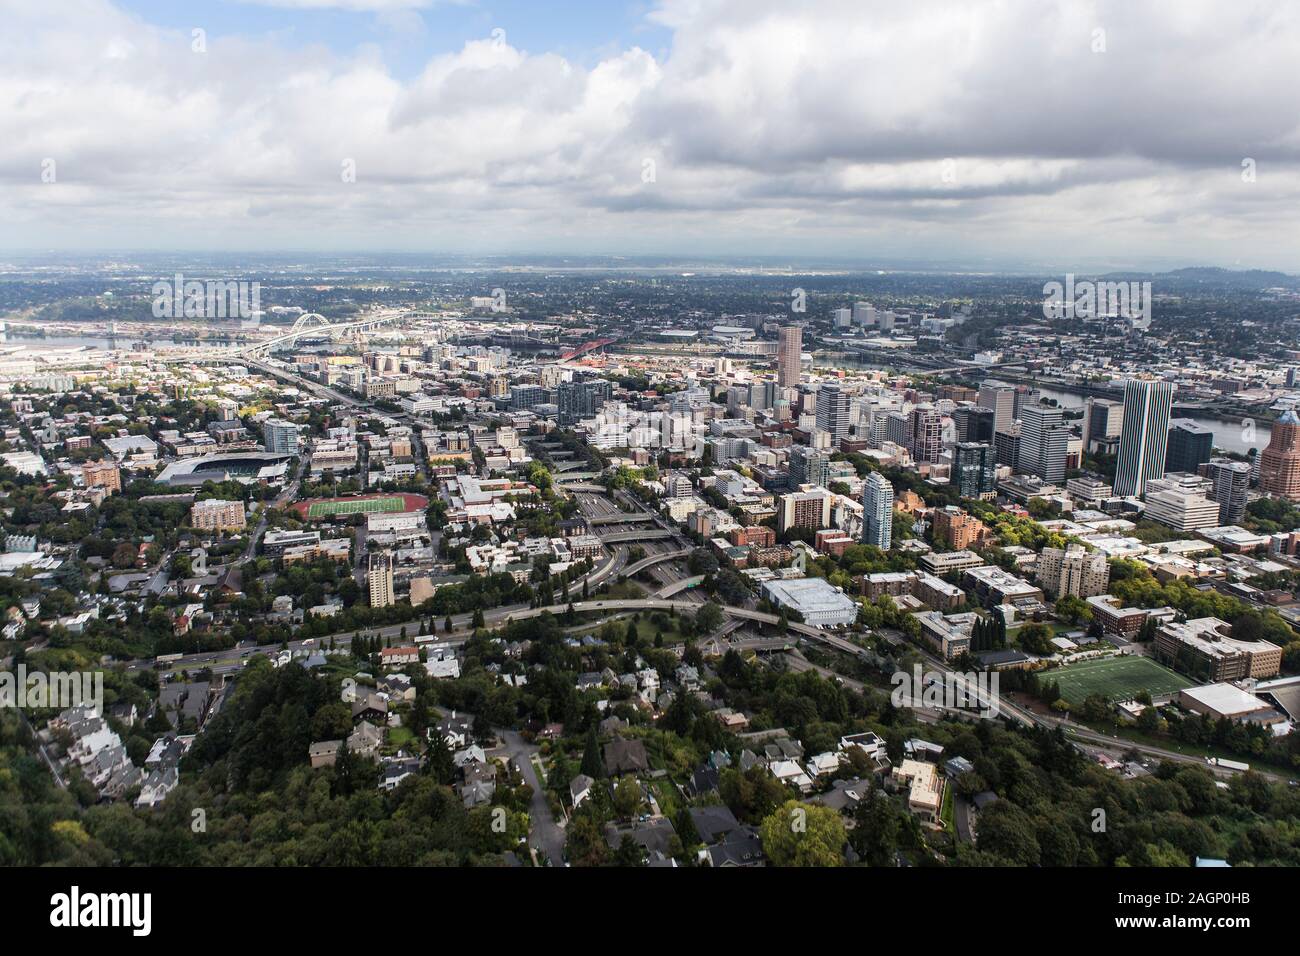 Aerial view of the buildings, homes, streets and bridges near downtown Portland, Oregon, USA. Stock Photo